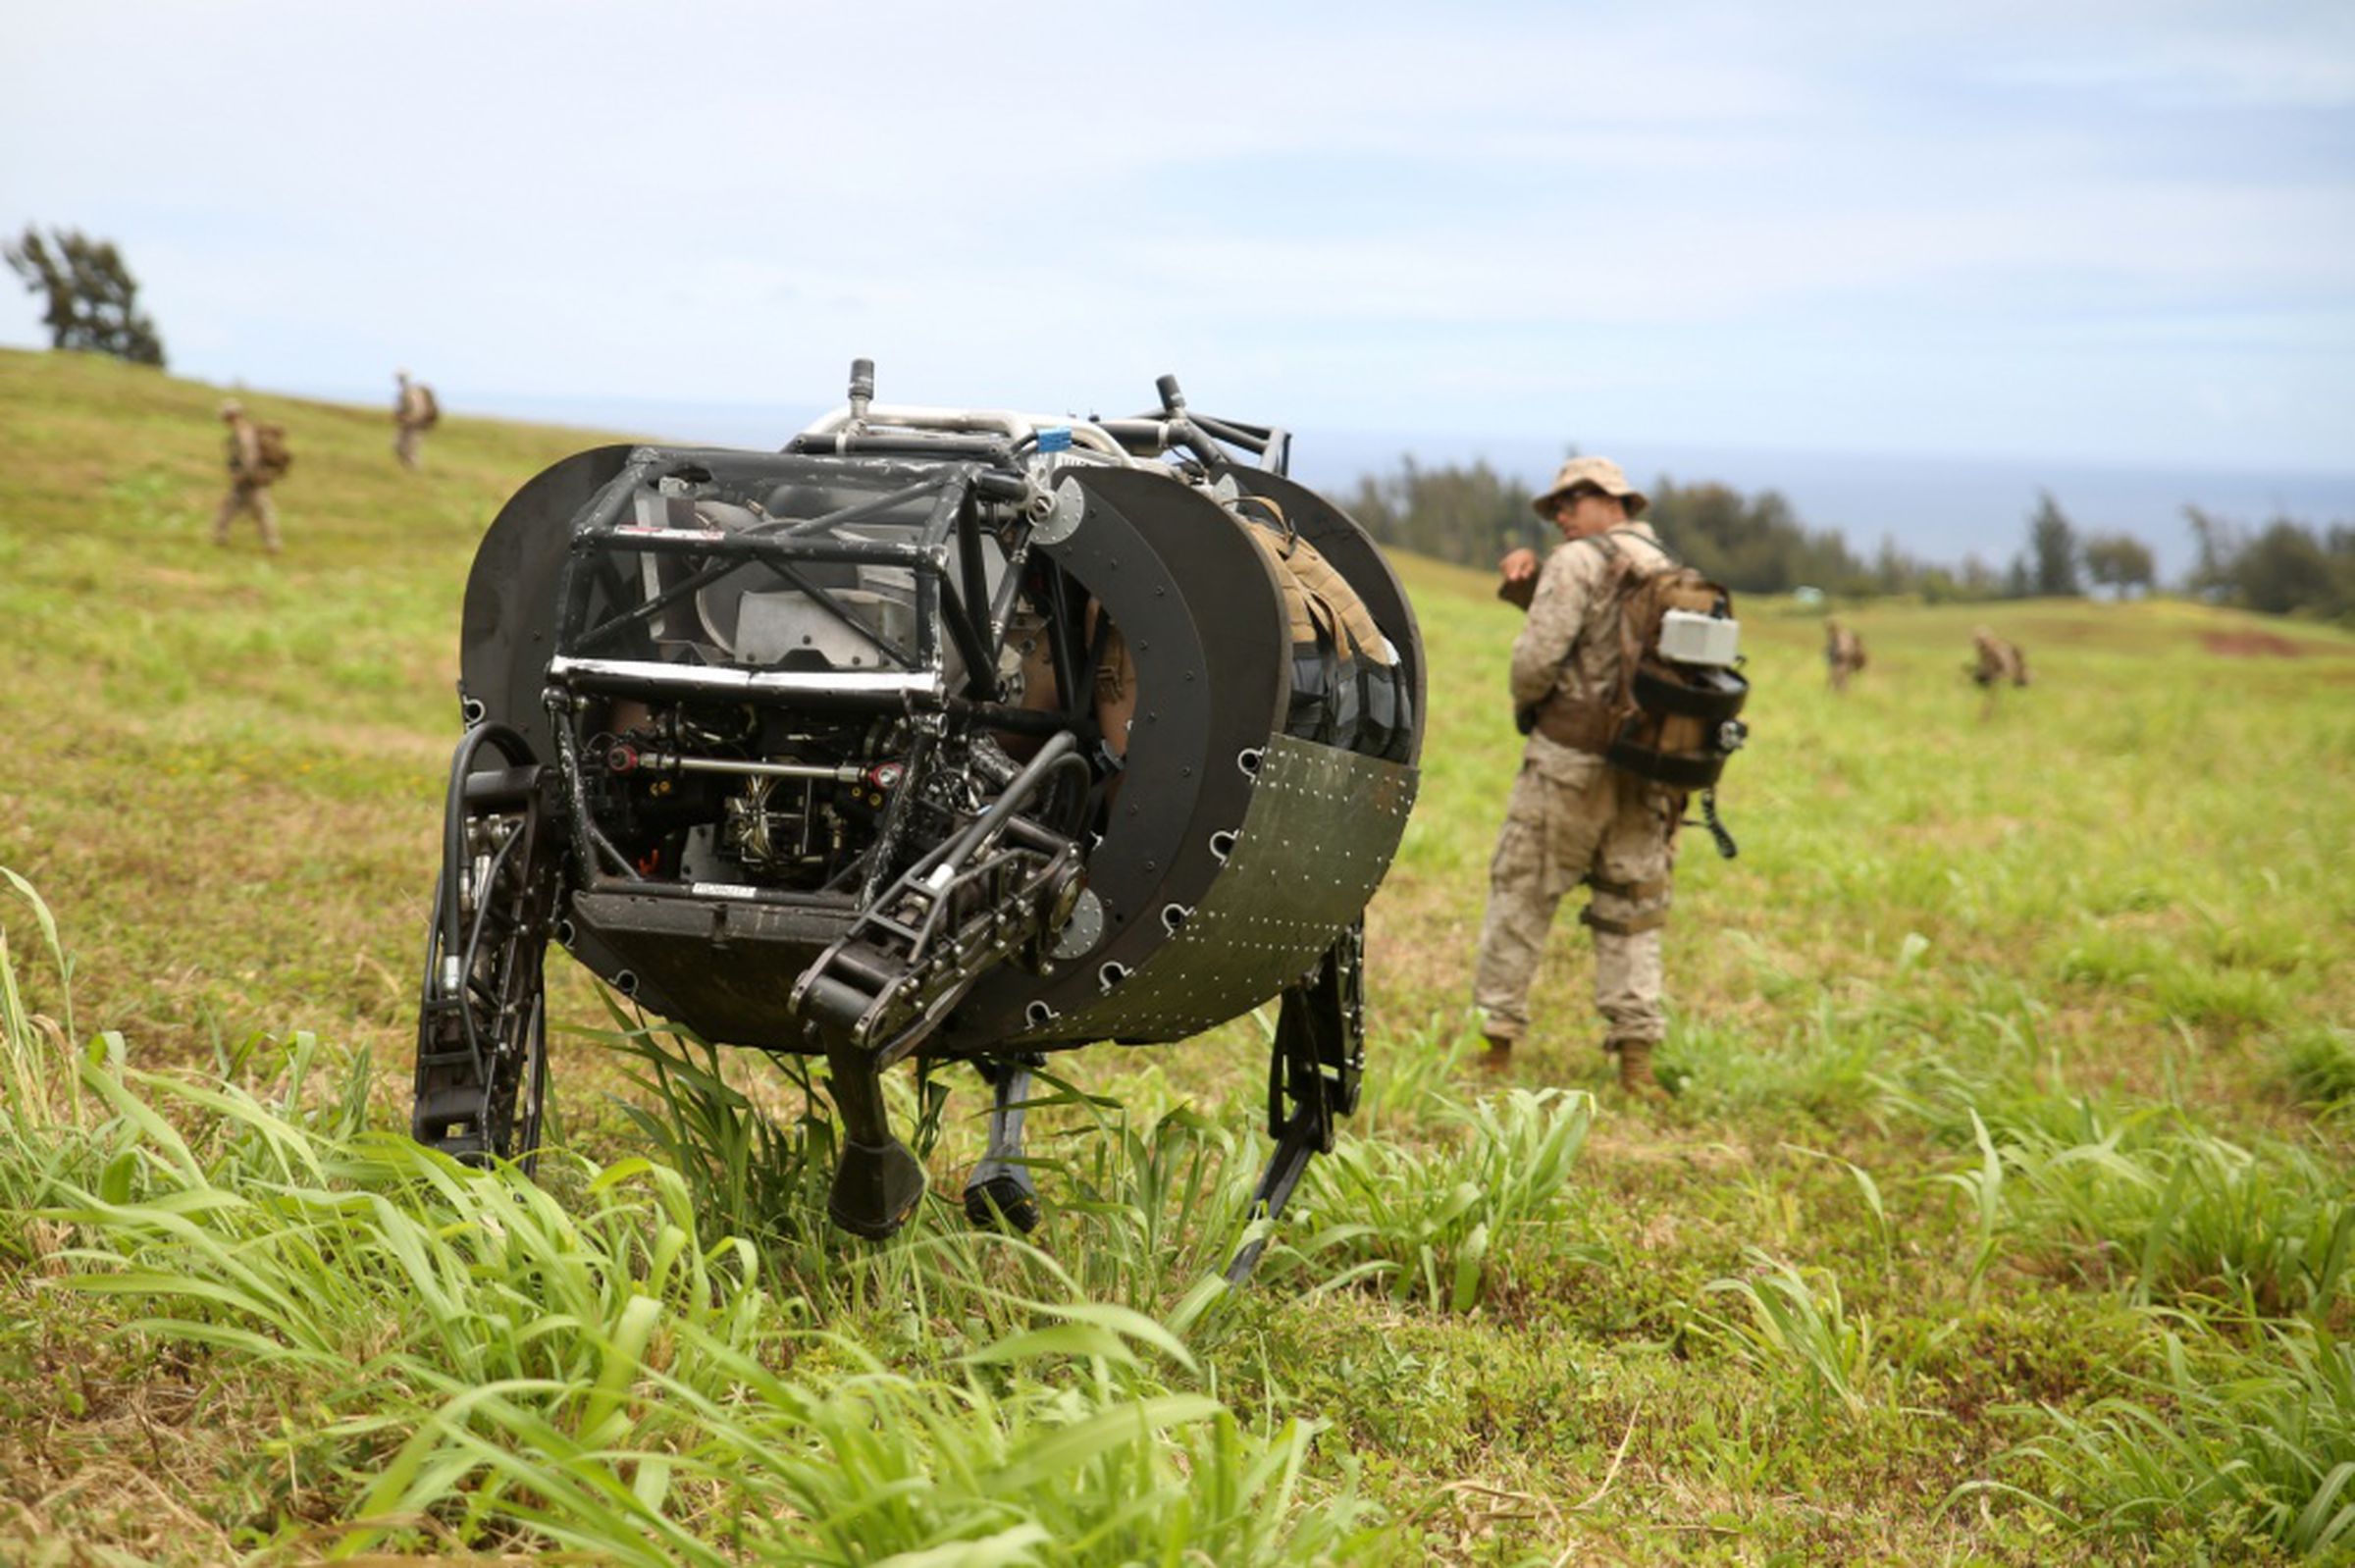 Boston Dynamics has developed robots for the military like BigDog and LS3 (above), but they were rejected for being too loud. 